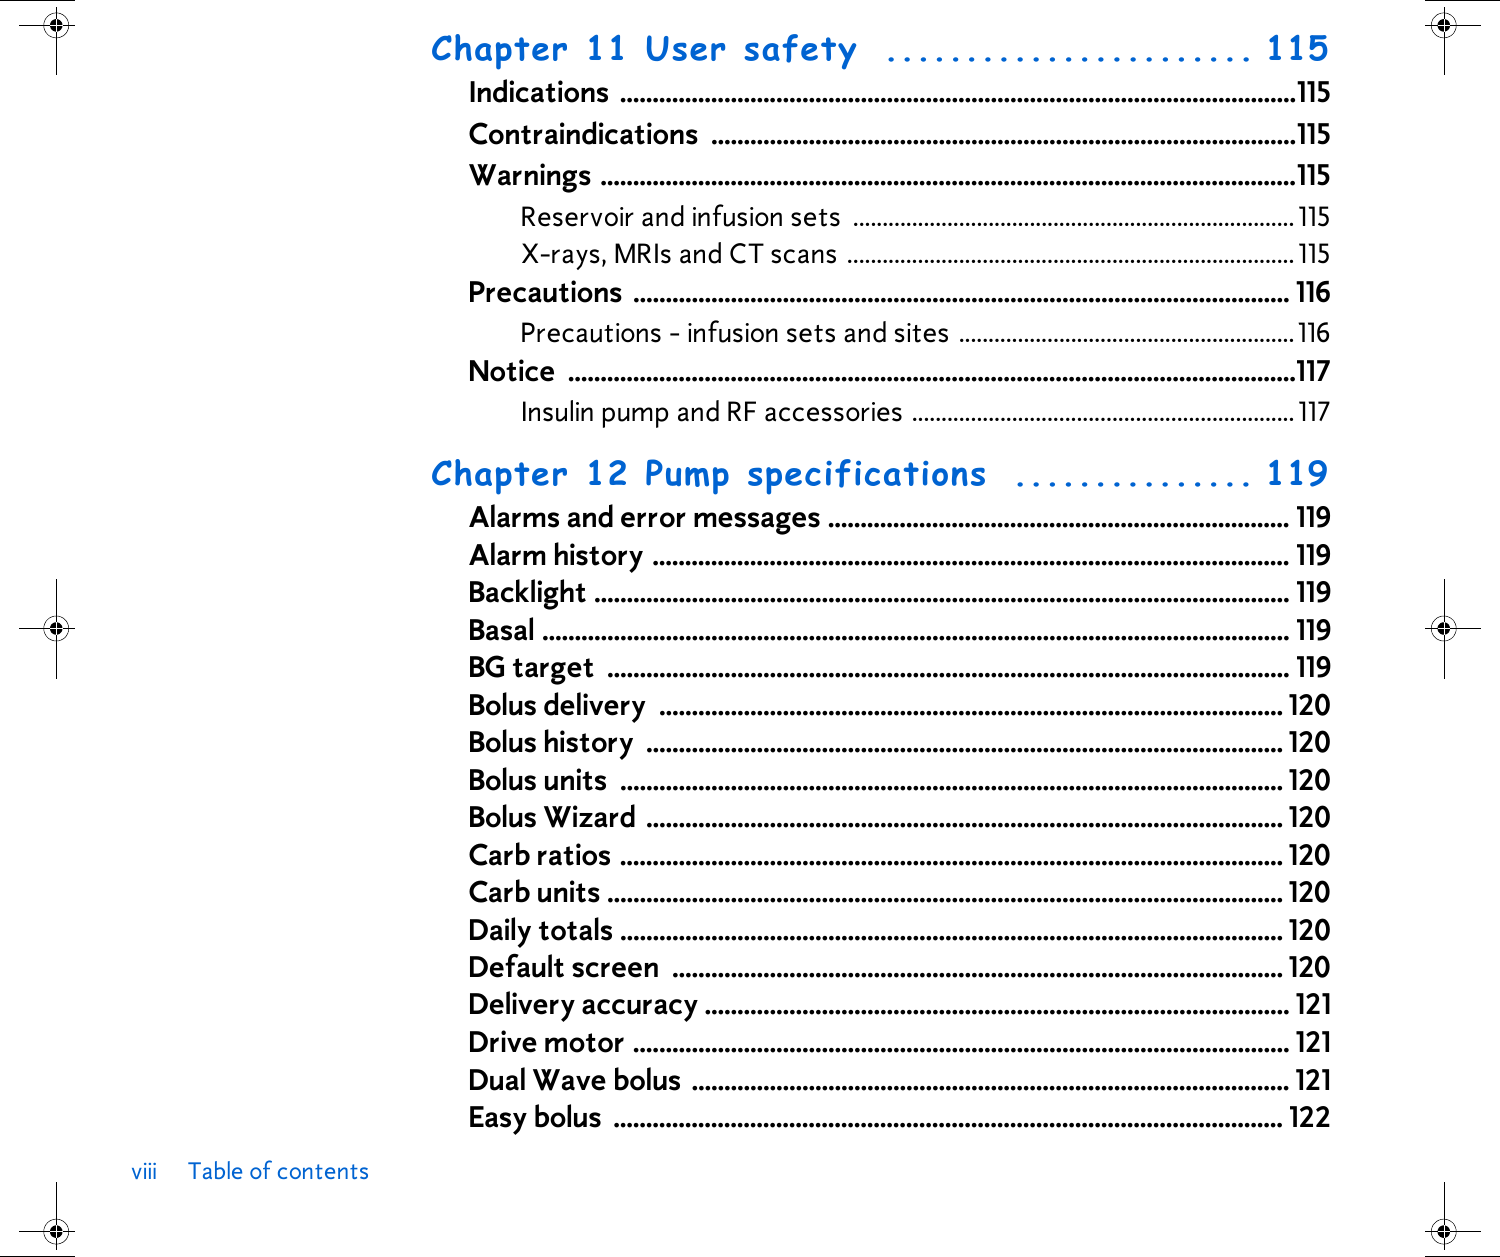 viii Table of contentsChapter 11 User safety  ....................... 115Indications ........................................................................................................115Contraindications ..........................................................................................115Warnings ...........................................................................................................115Reservoir and infusion sets ........................................................................... 115X-rays, MRIs and CT scans ............................................................................ 115Precautions ..................................................................................................... 116Precautions - infusion sets and sites .........................................................116Notice ................................................................................................................117Insulin pump and RF accessories ................................................................. 117Chapter 12 Pump specifications  ............... 119Alarms and error messages ....................................................................... 119Alarm history .................................................................................................. 119Backlight ........................................................................................................... 119Basal ................................................................................................................... 119BG target  ......................................................................................................... 119Bolus delivery  ................................................................................................ 120Bolus history  .................................................................................................. 120Bolus units  ...................................................................................................... 120Bolus Wizard .................................................................................................. 120Carb ratios ...................................................................................................... 120Carb units ........................................................................................................ 120Daily totals ...................................................................................................... 120Default screen  .............................................................................................. 120Delivery accuracy .......................................................................................... 121Drive motor ..................................................................................................... 121Dual Wave bolus  ............................................................................................ 121Easy bolus  ....................................................................................................... 122